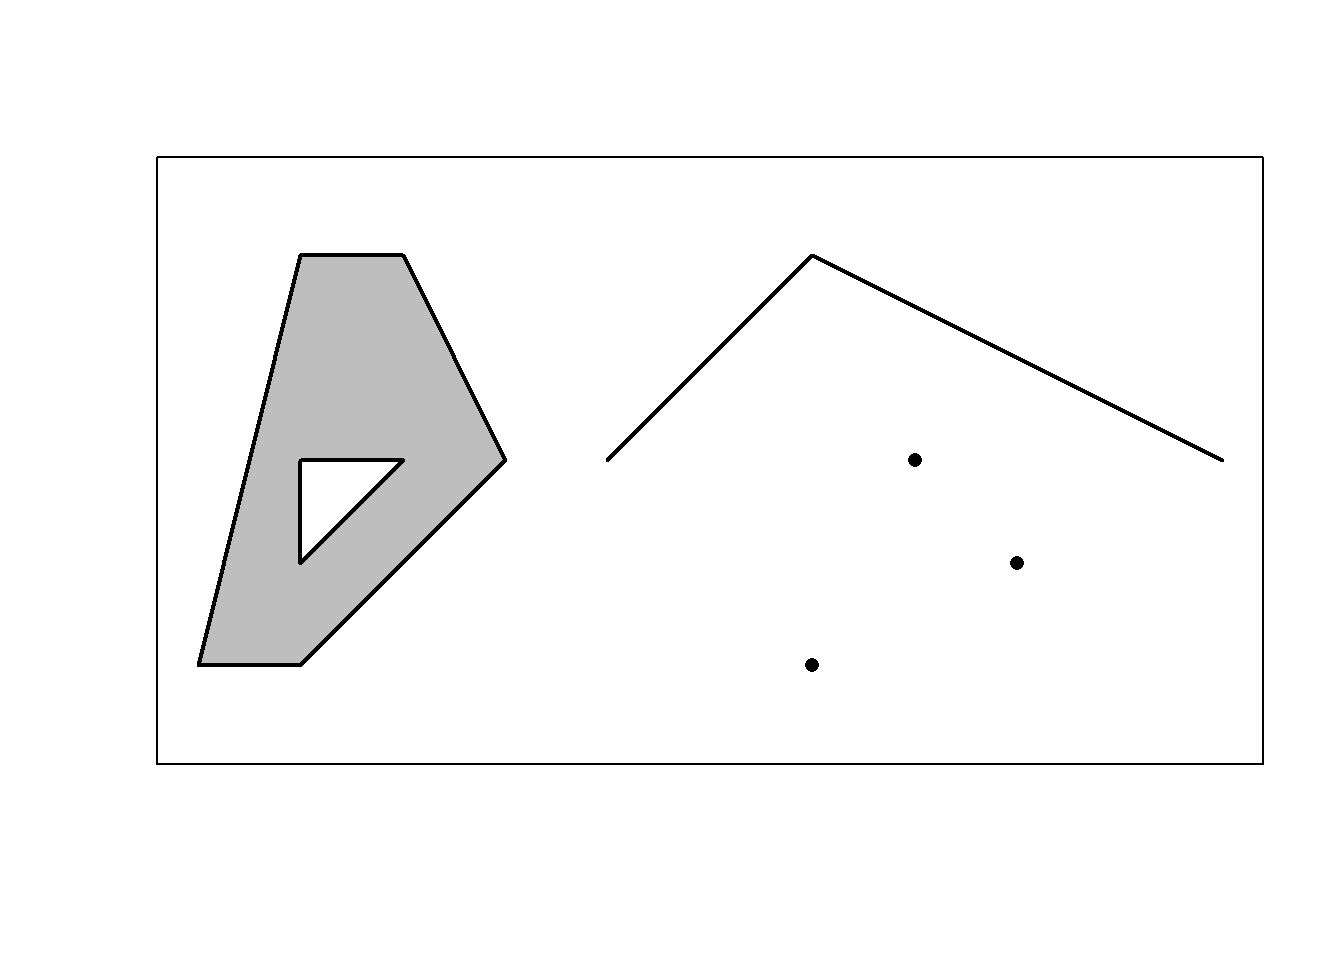 Examples of vector data (points, line and polygon).